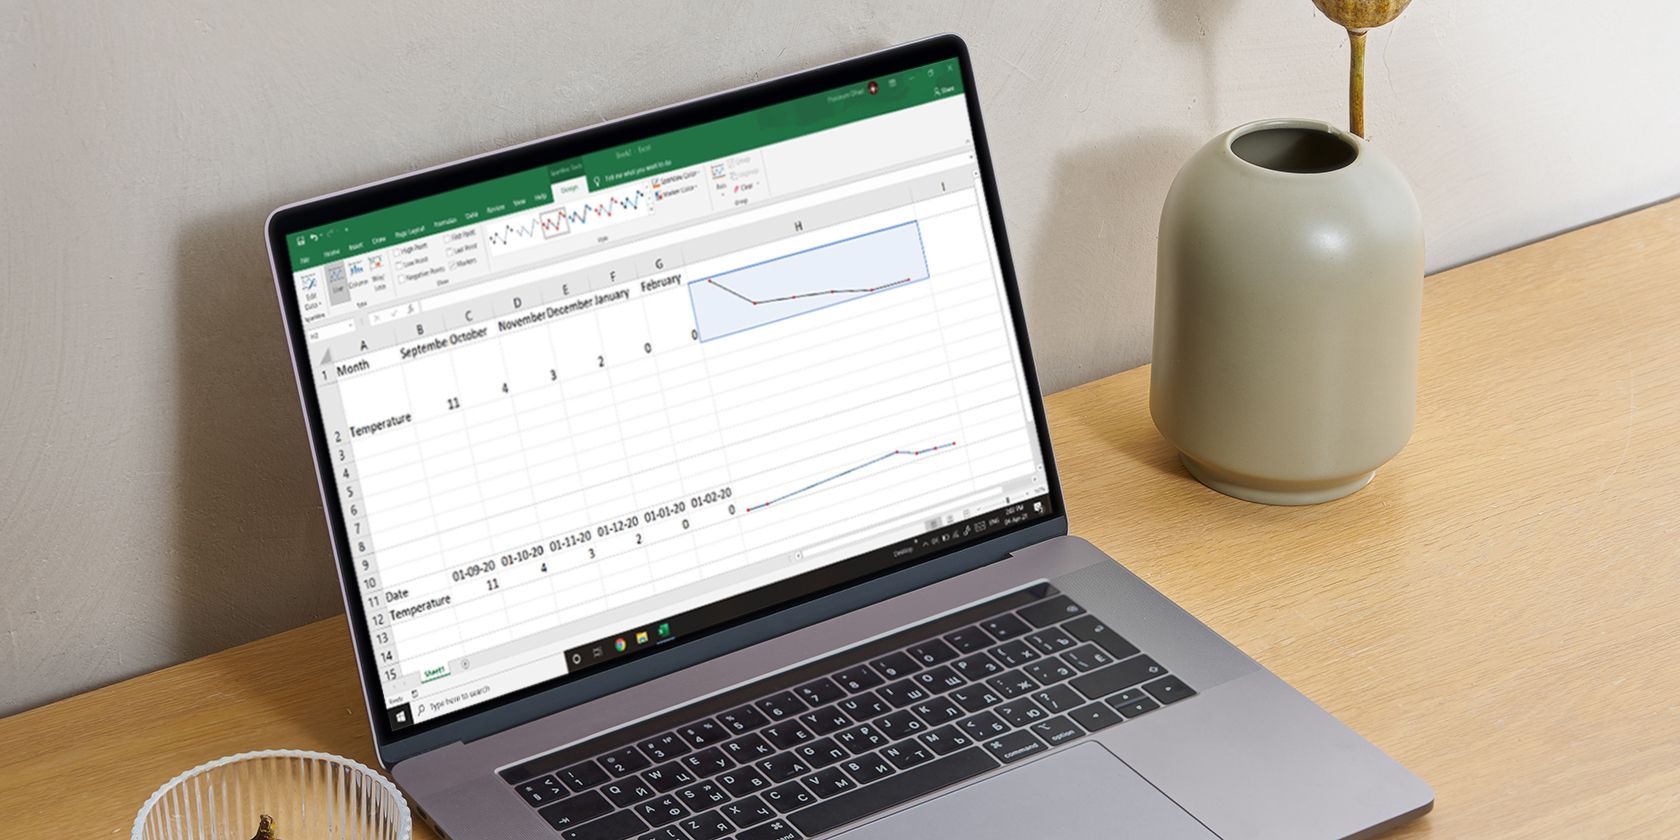 Learn how to create Sparklines in Microsoft Excel.